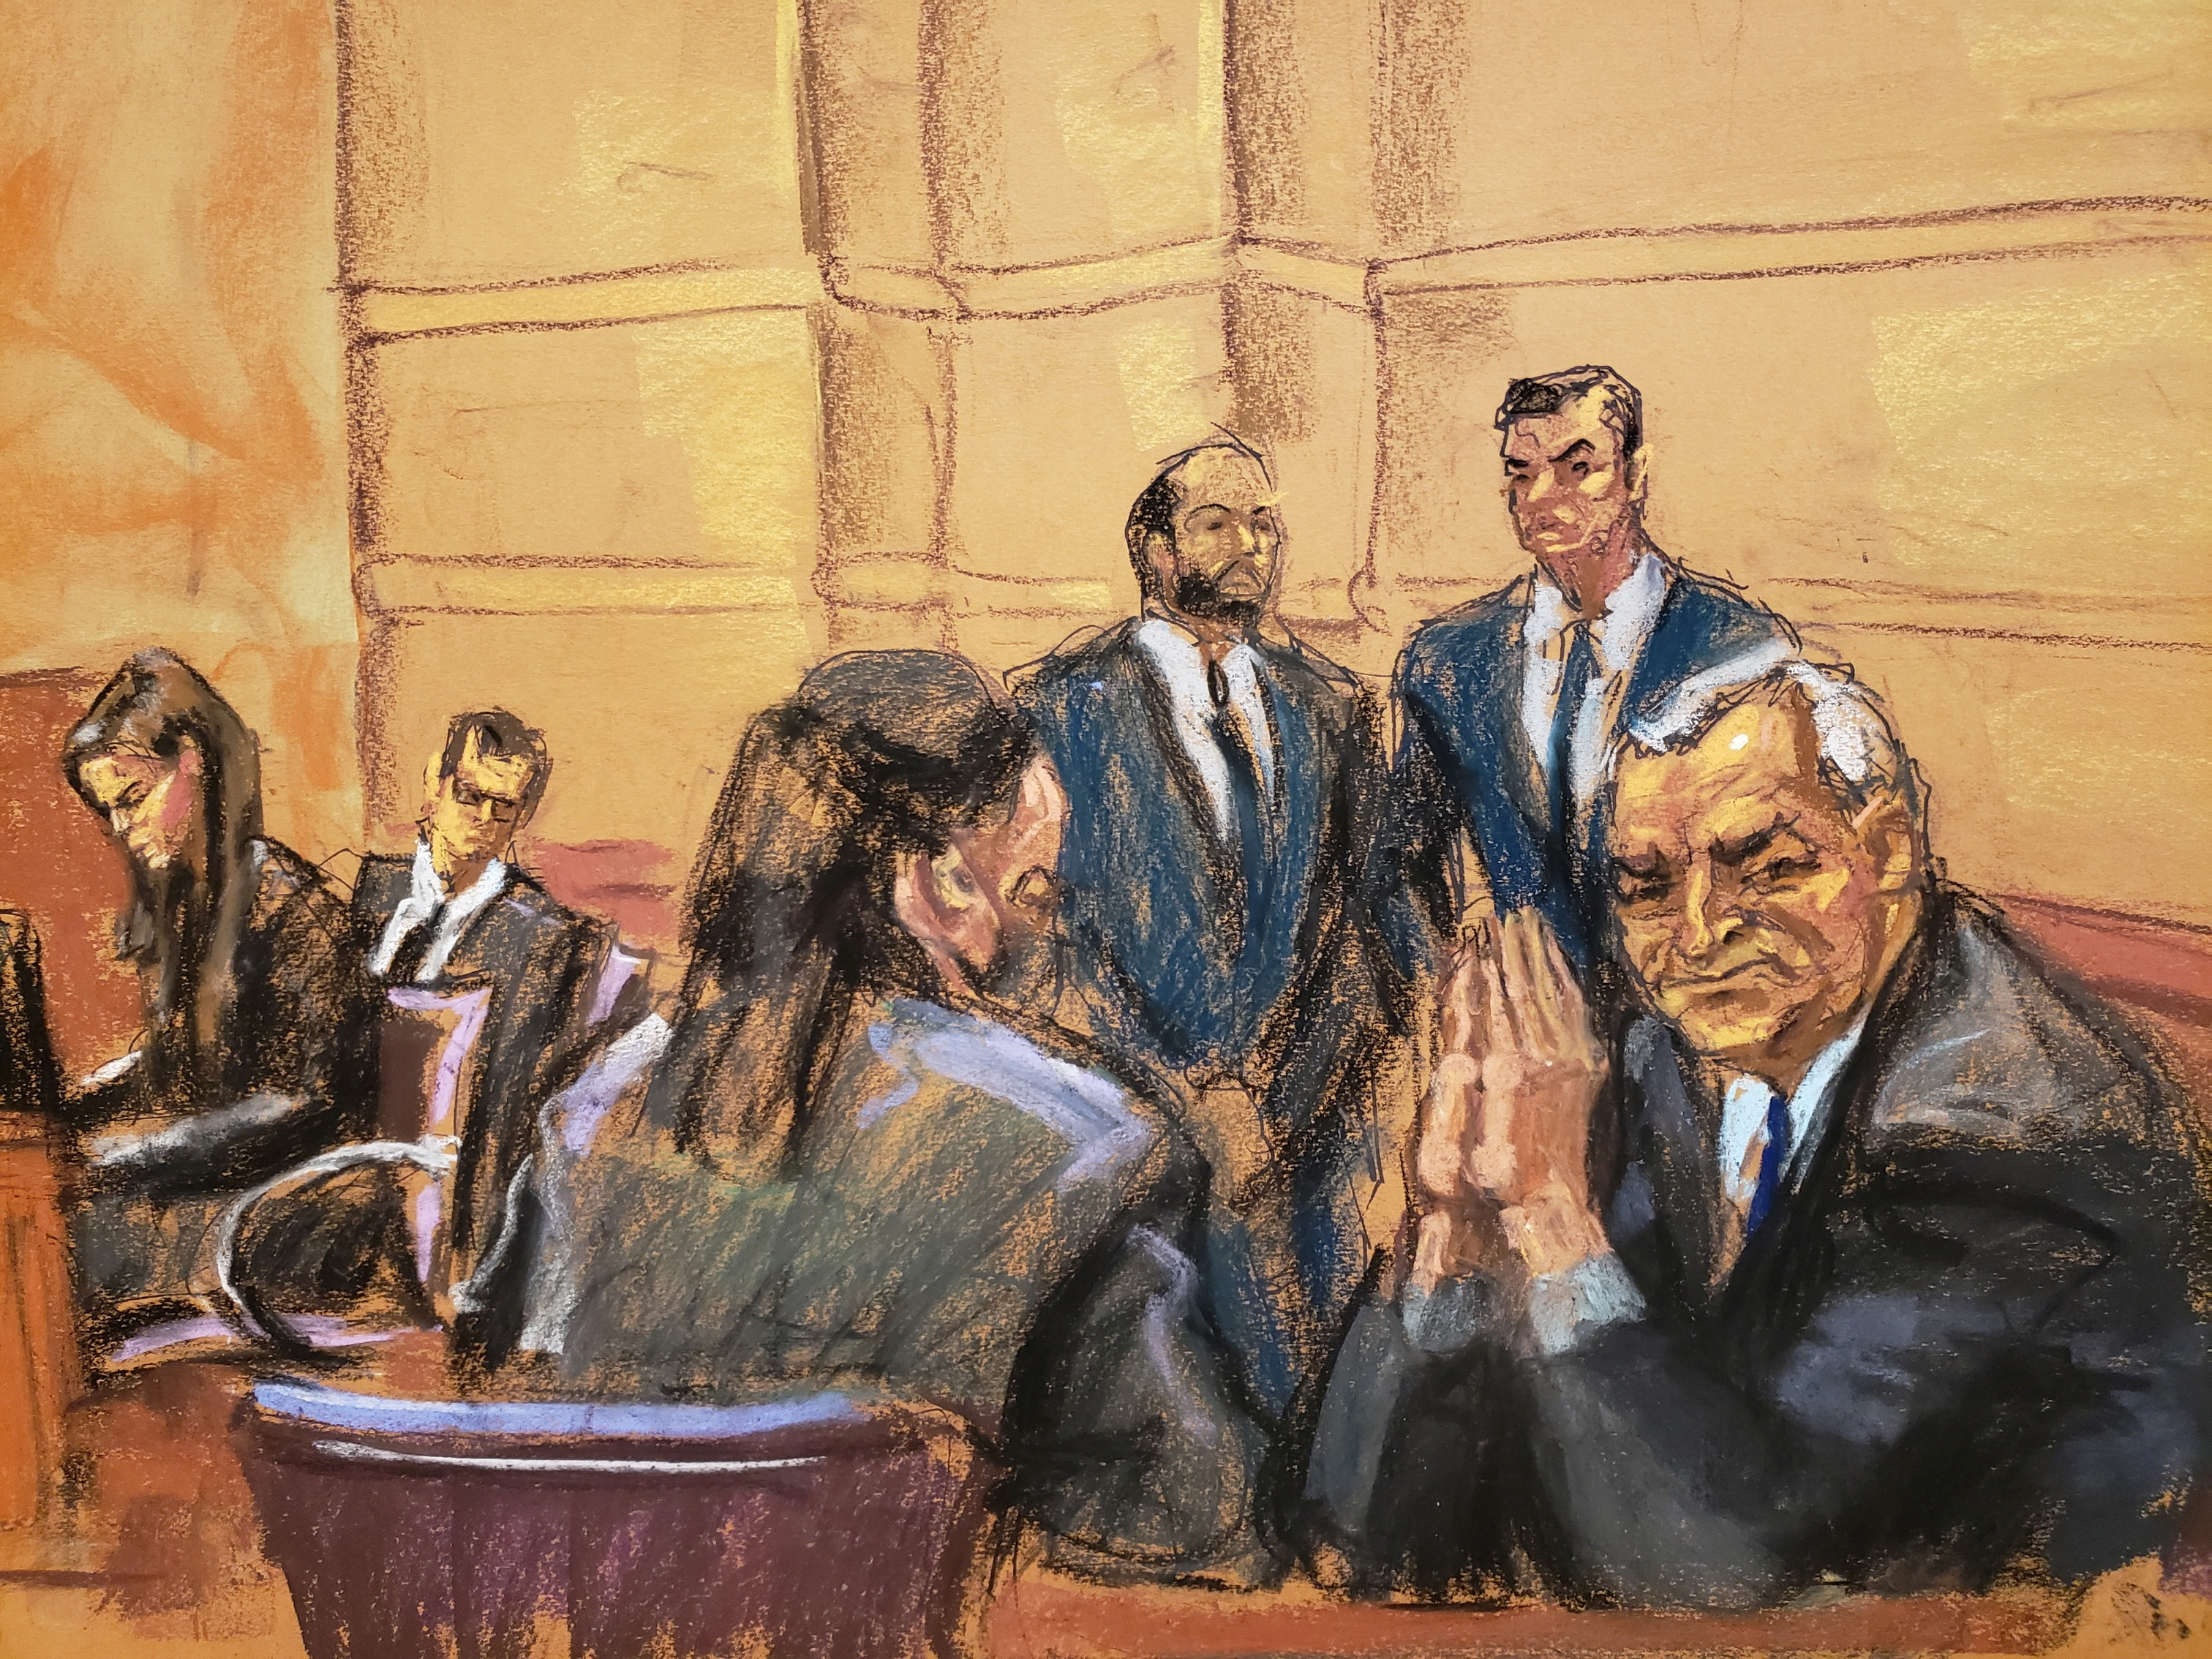 Mexico's former Public Security Minister Genaro Garcia Luna looks back at his wife seated in the audience during his trial on charges that he accepted millions of dollars to protect the powerful Sinaloa Cartel, once run by imprisoned drug lord Joaquin "El Chapo" Guzman, at a courthouse in New York City, U.S., January 30, 2023 in this courtroom sketch. REUTERS/Jane Rosenberg